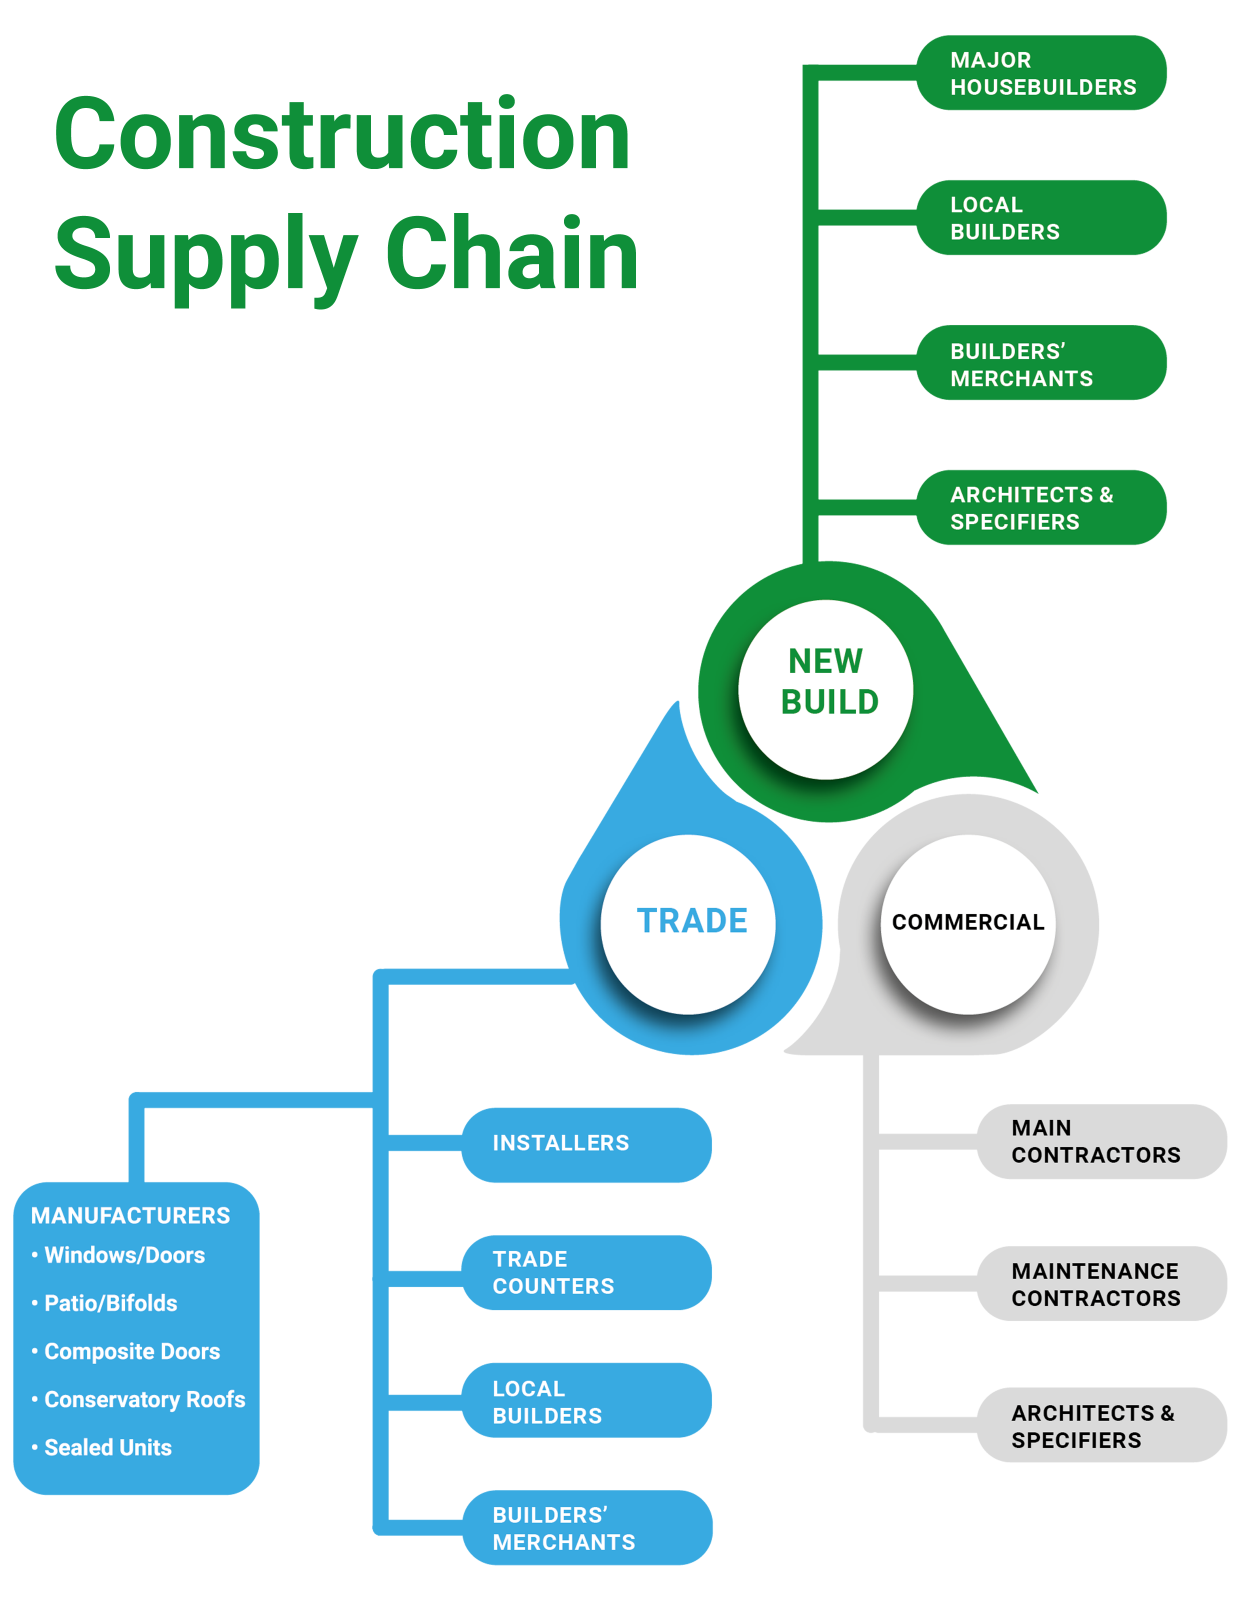 Construction supply chain graphic